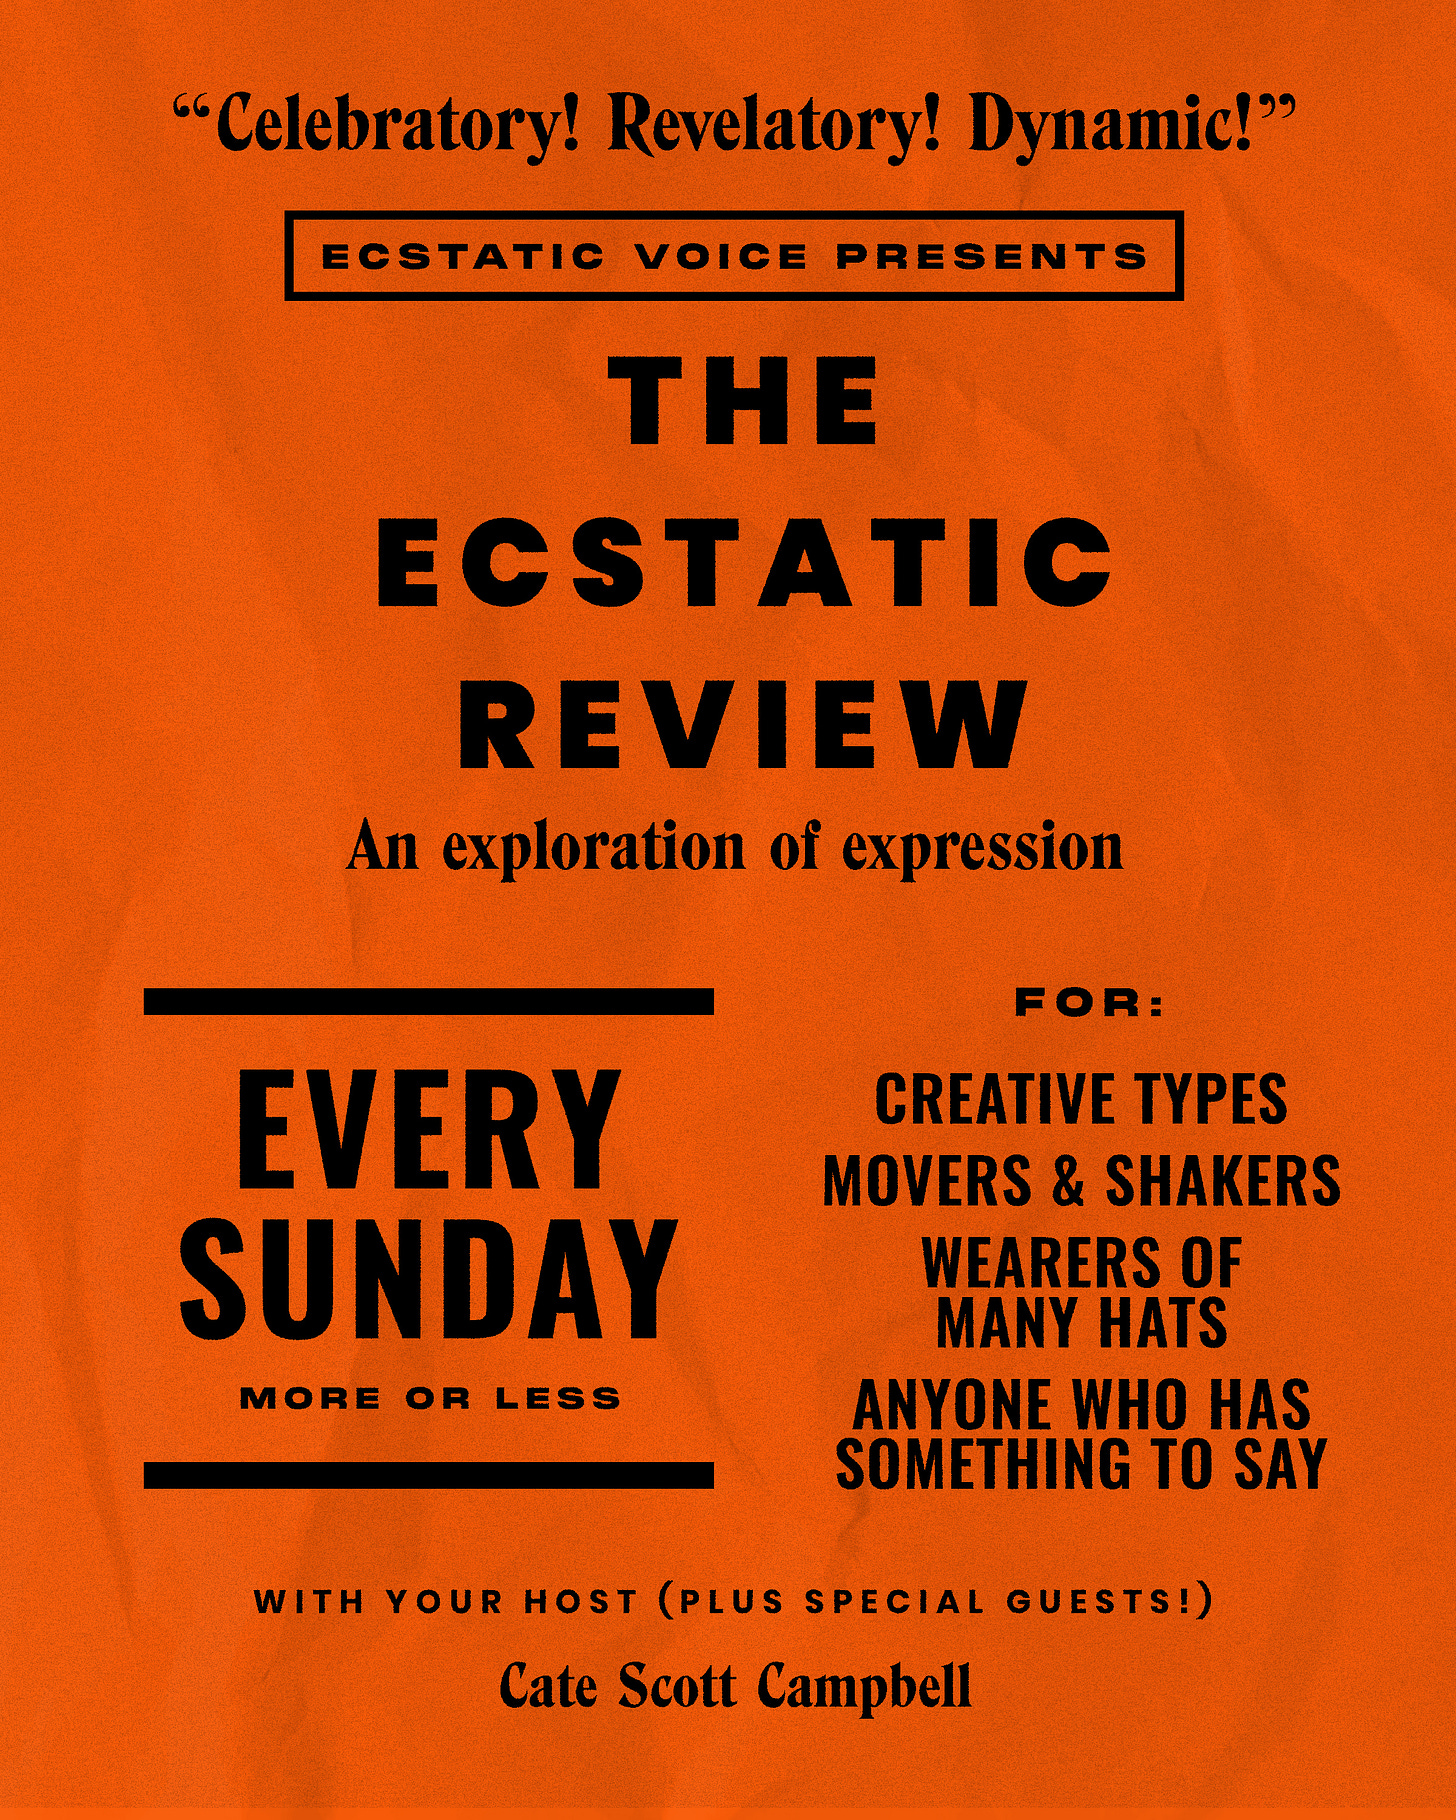 The Ecstatic Review Playbill 2